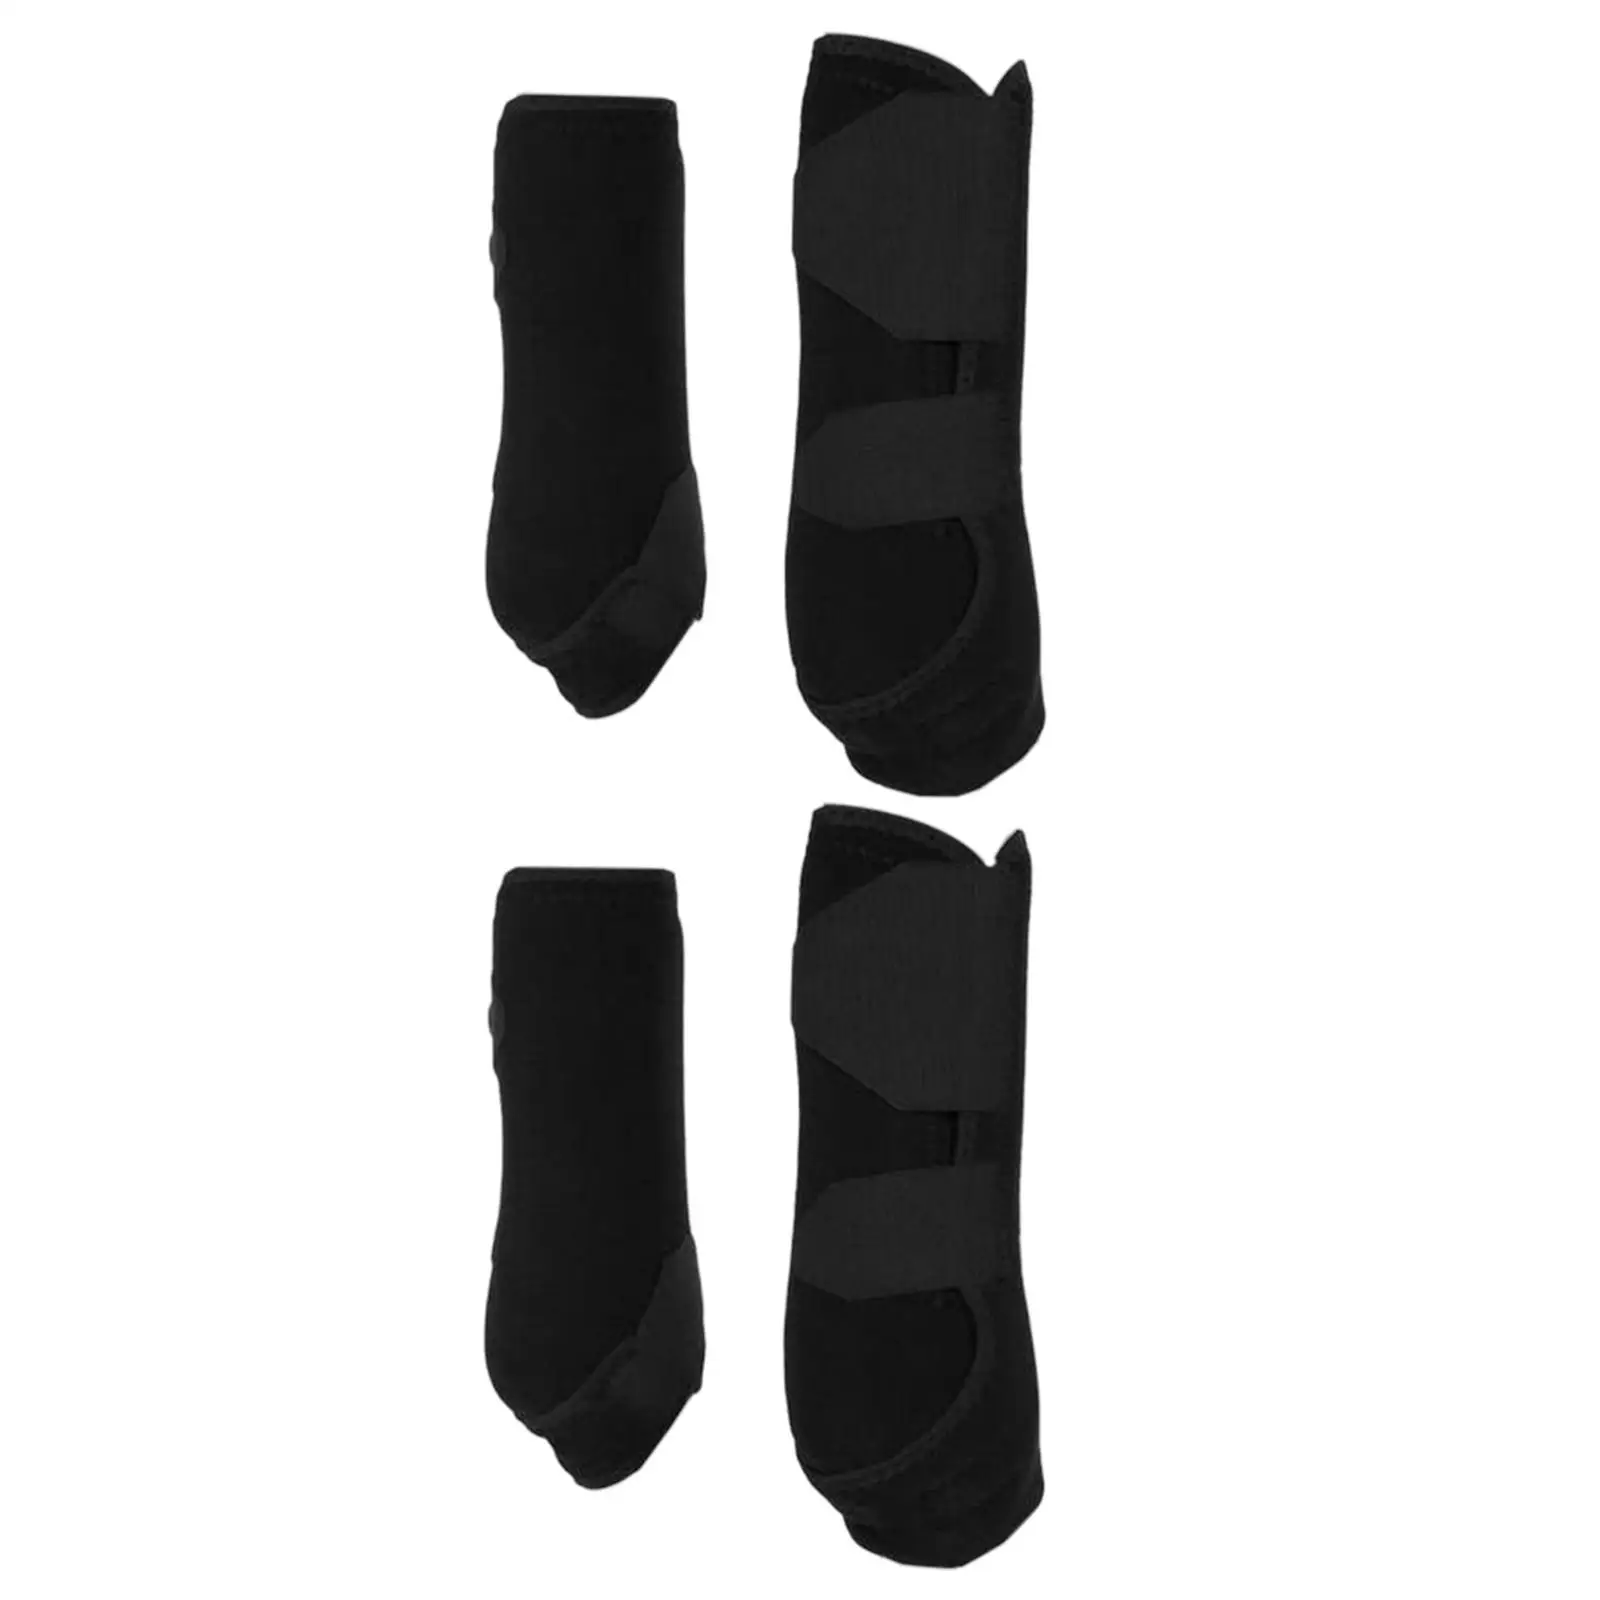 4Pcs Neoprene Horse Boots Leg Wraps Shock Absorbing Protector Guard for Jumping